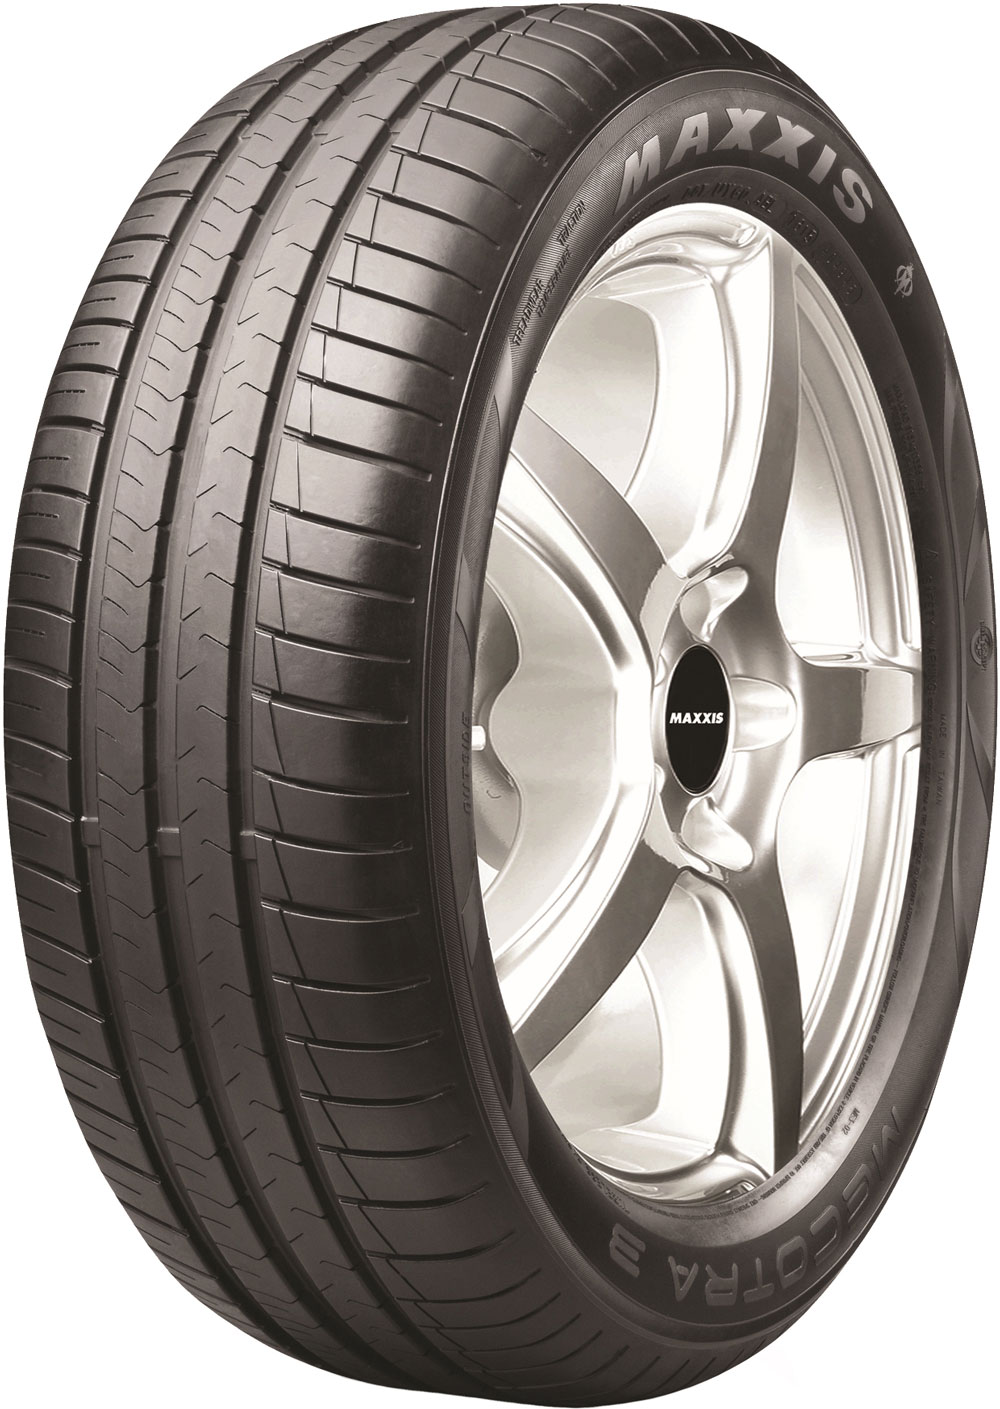 Anvelope auto MAXXIS ME3 XL 165/80 R13 87T